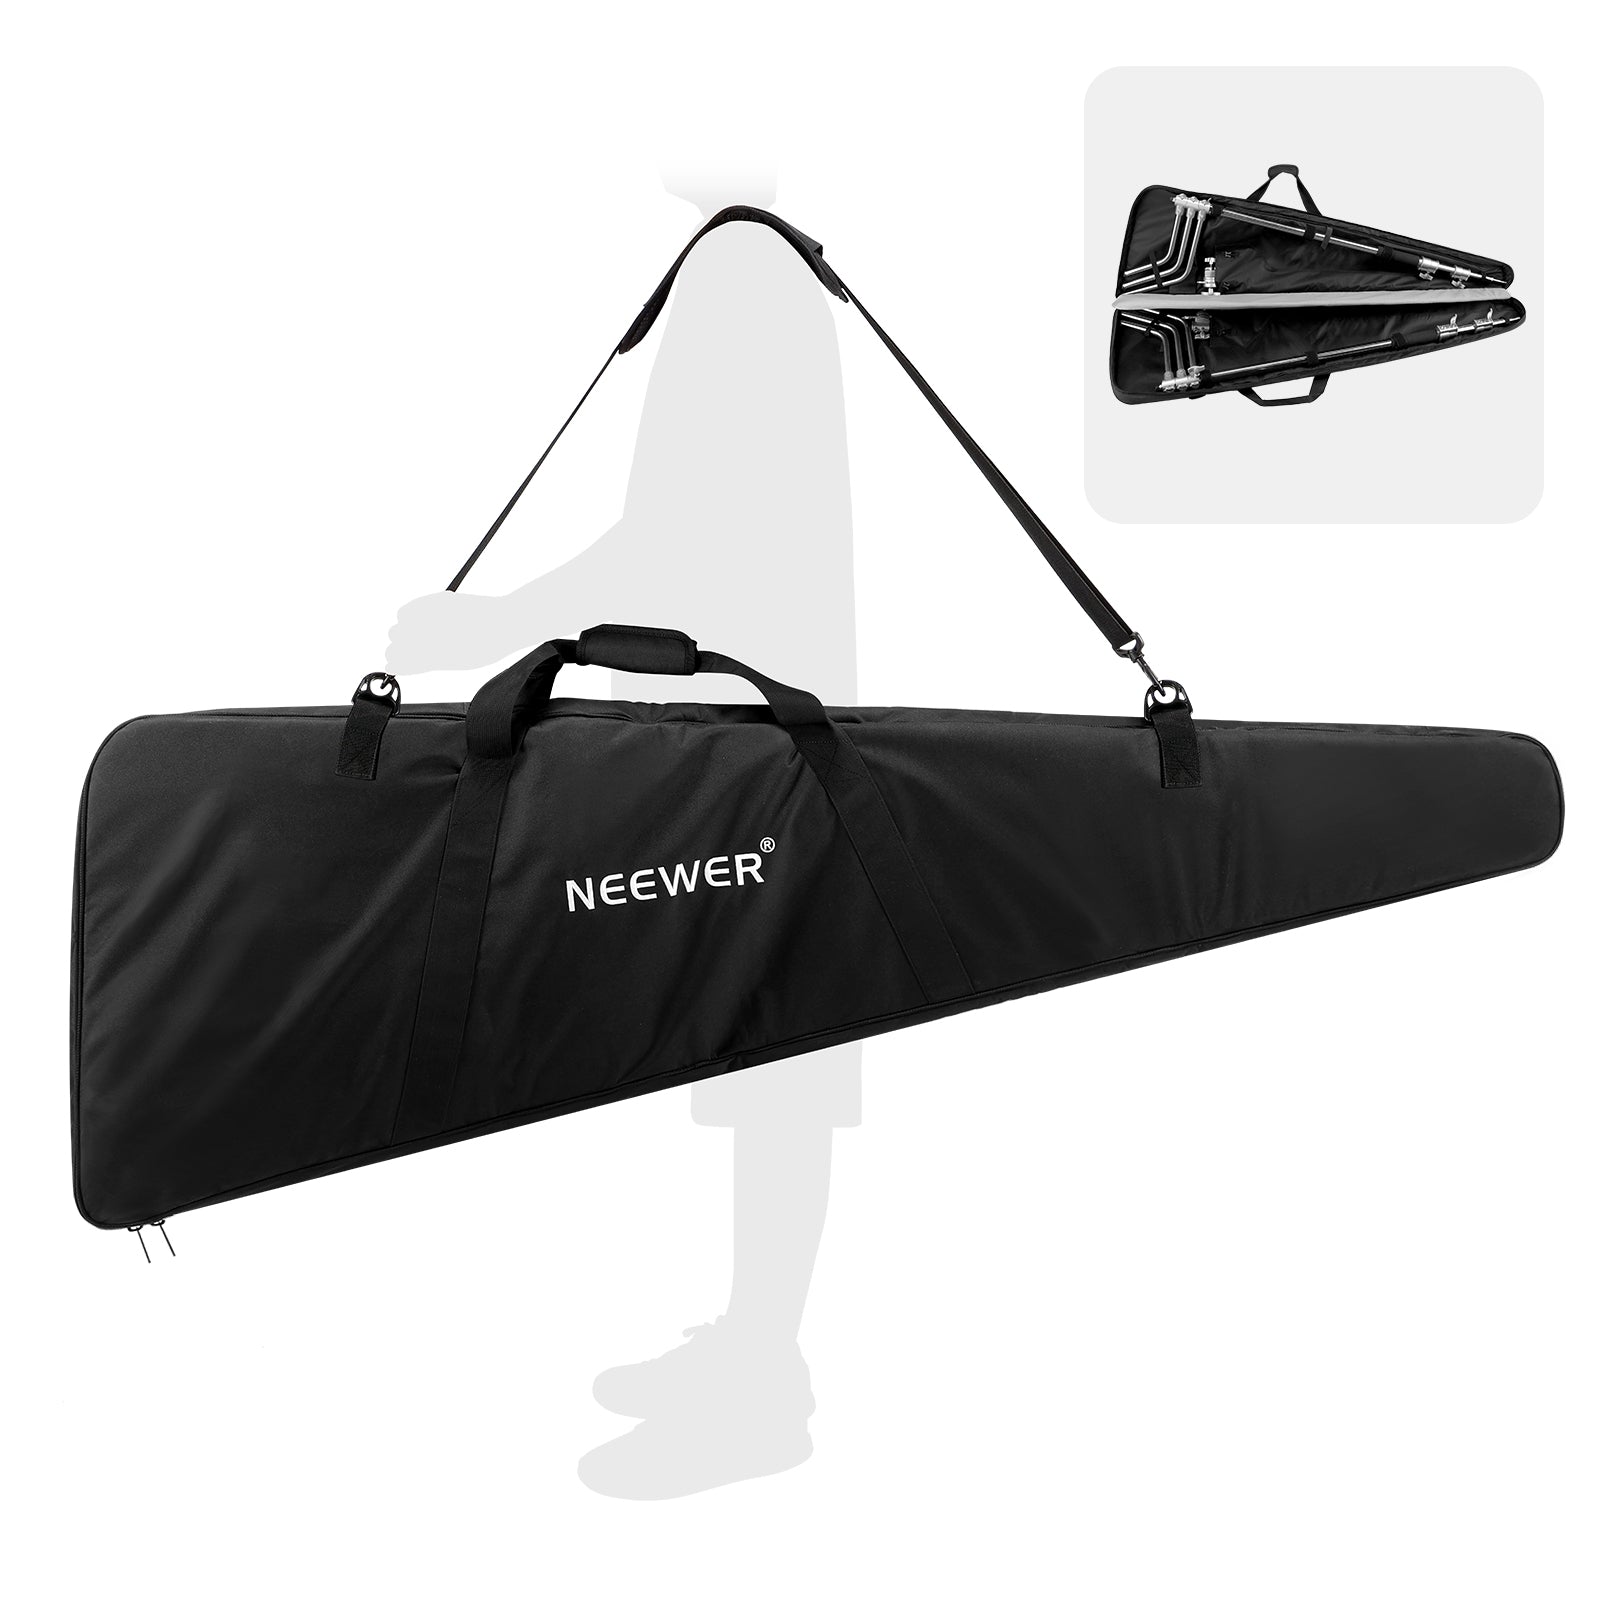 NEEWER NB-05 Upgraded Carrying Bag for Two C Stands - NEEWER